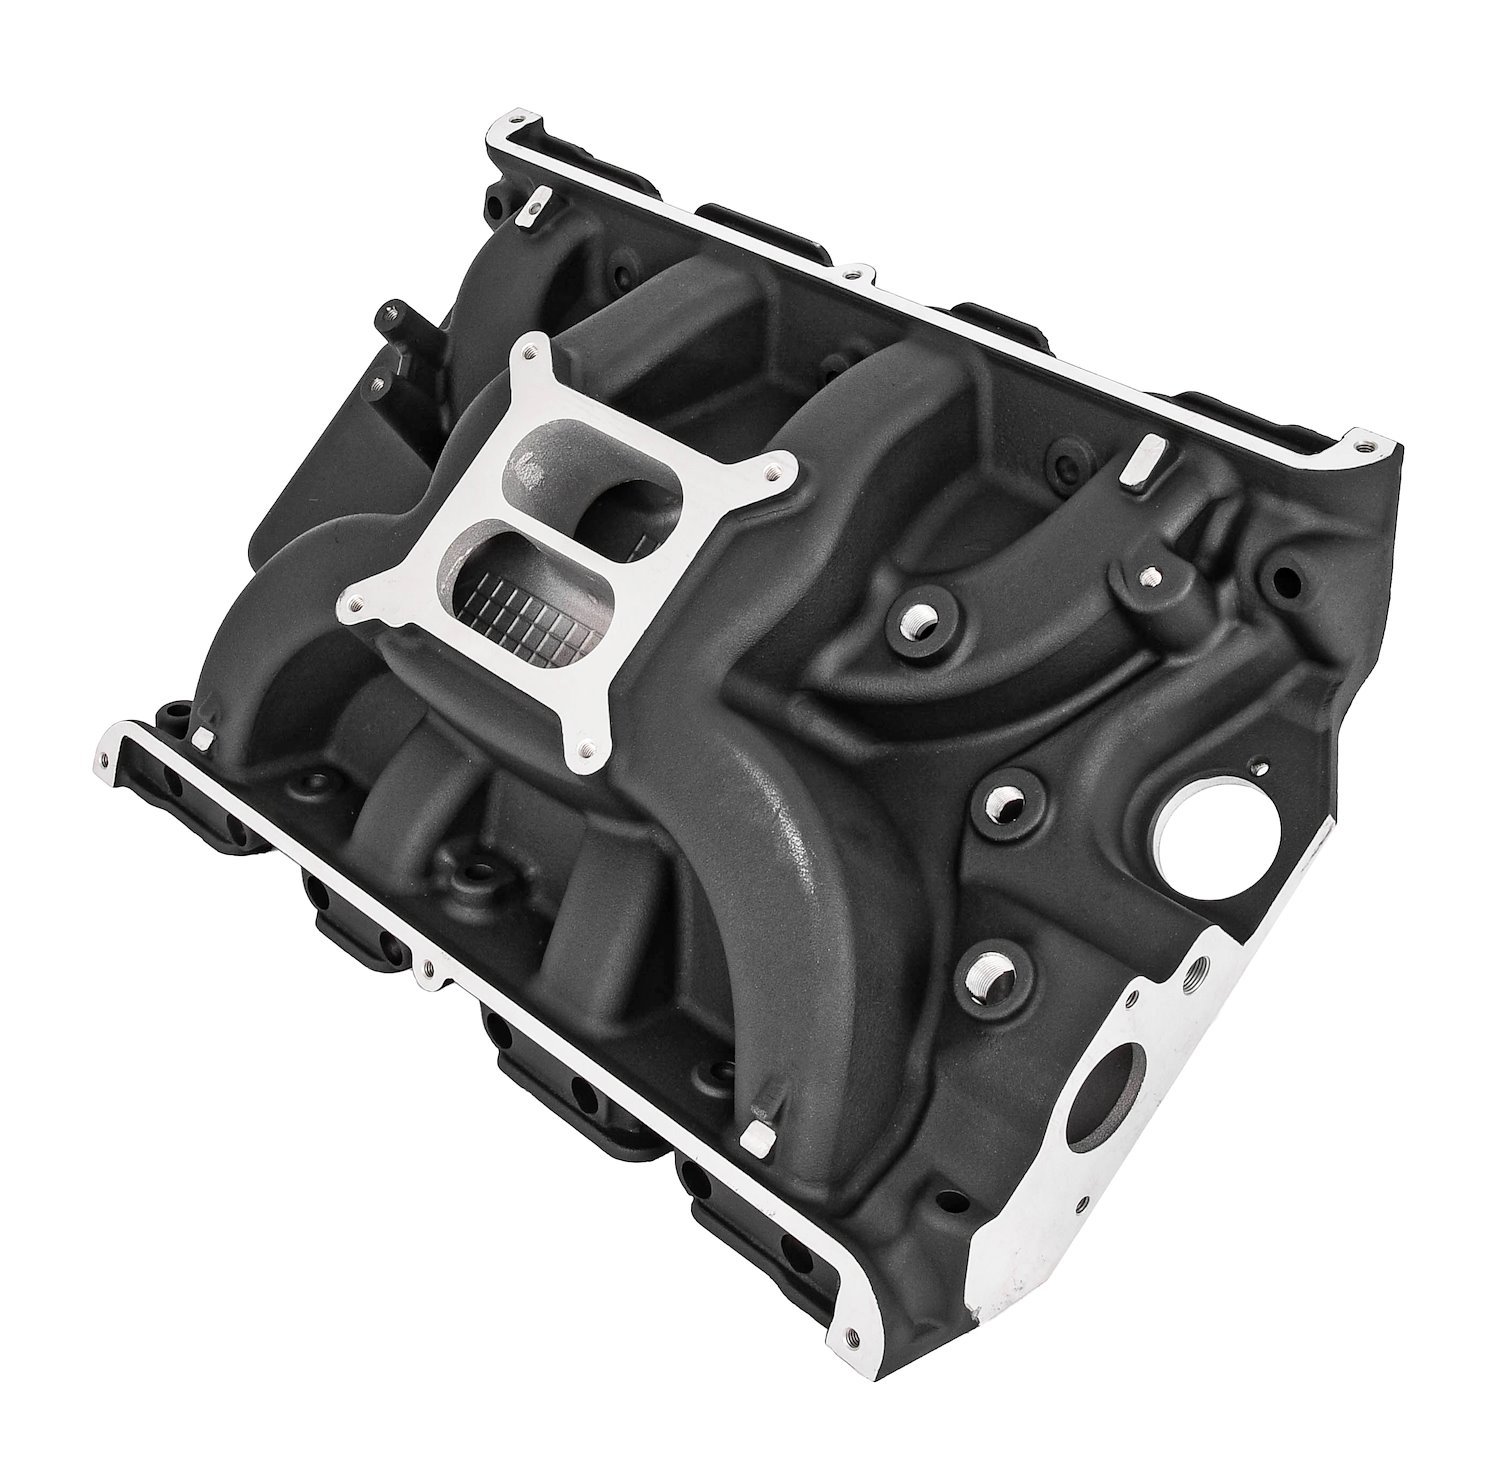 Intake Manifold for Ford 332-428 FE Series Engines,